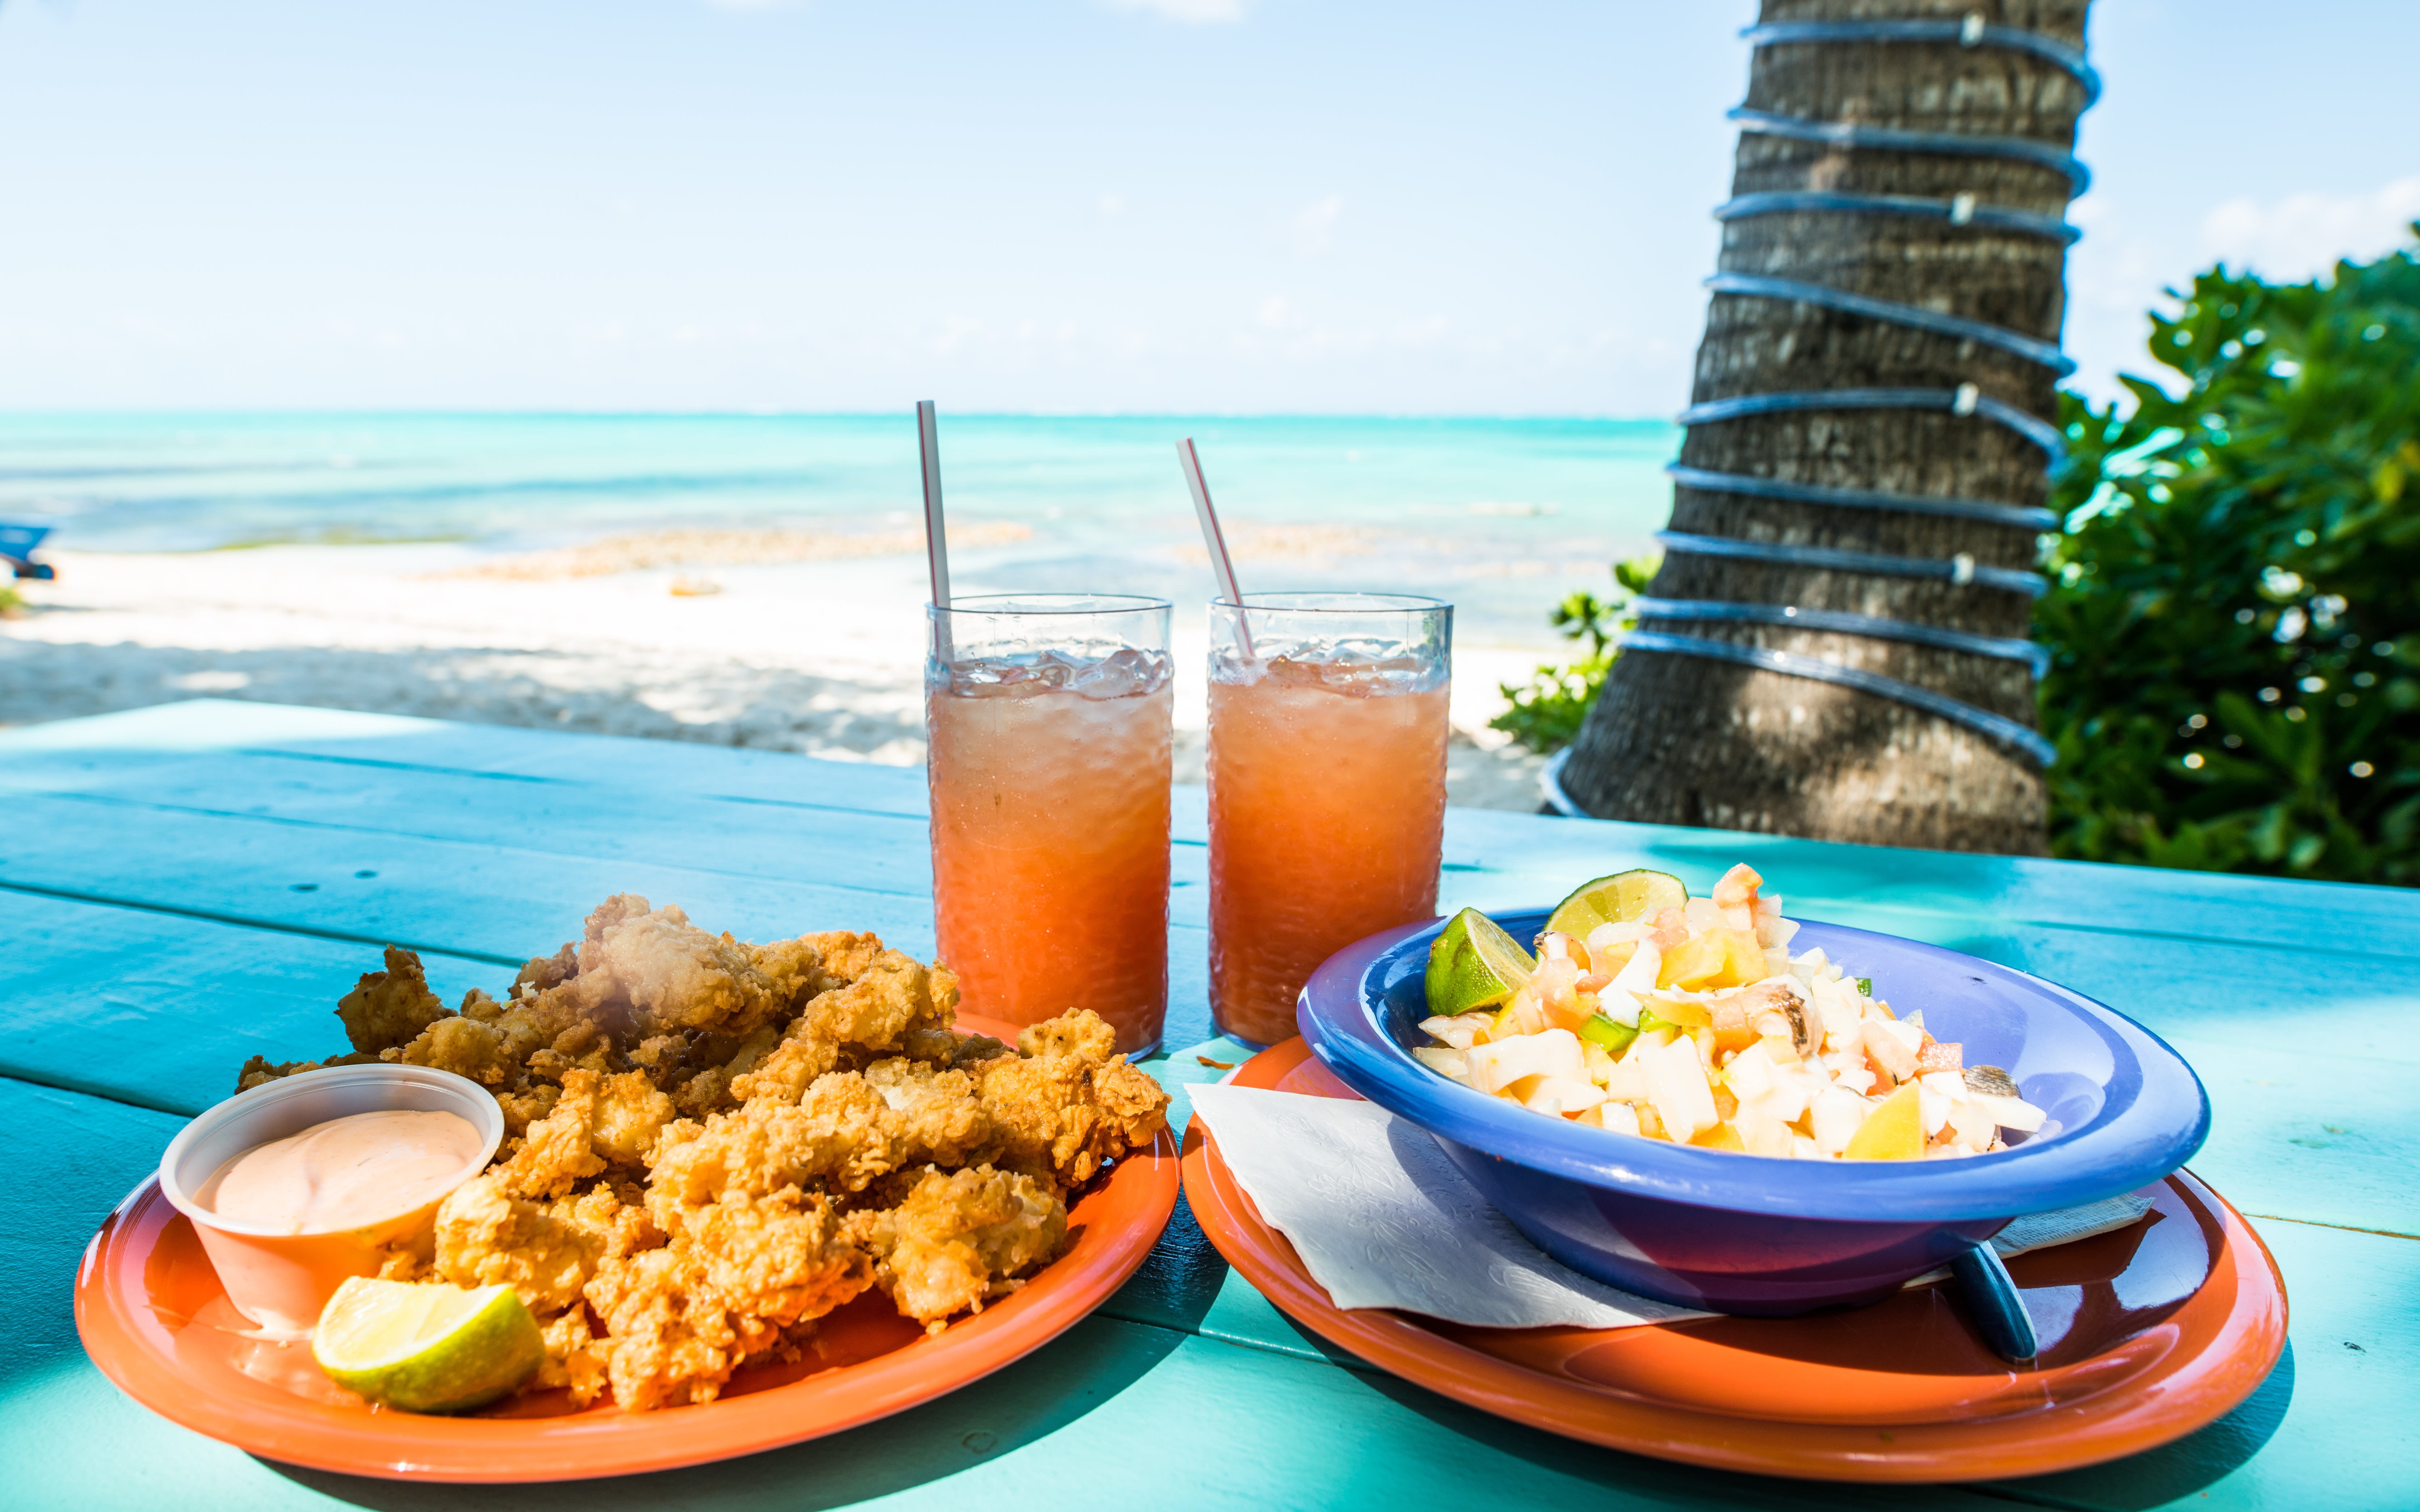 An image of conch salad and drinks in Turks & Caicos